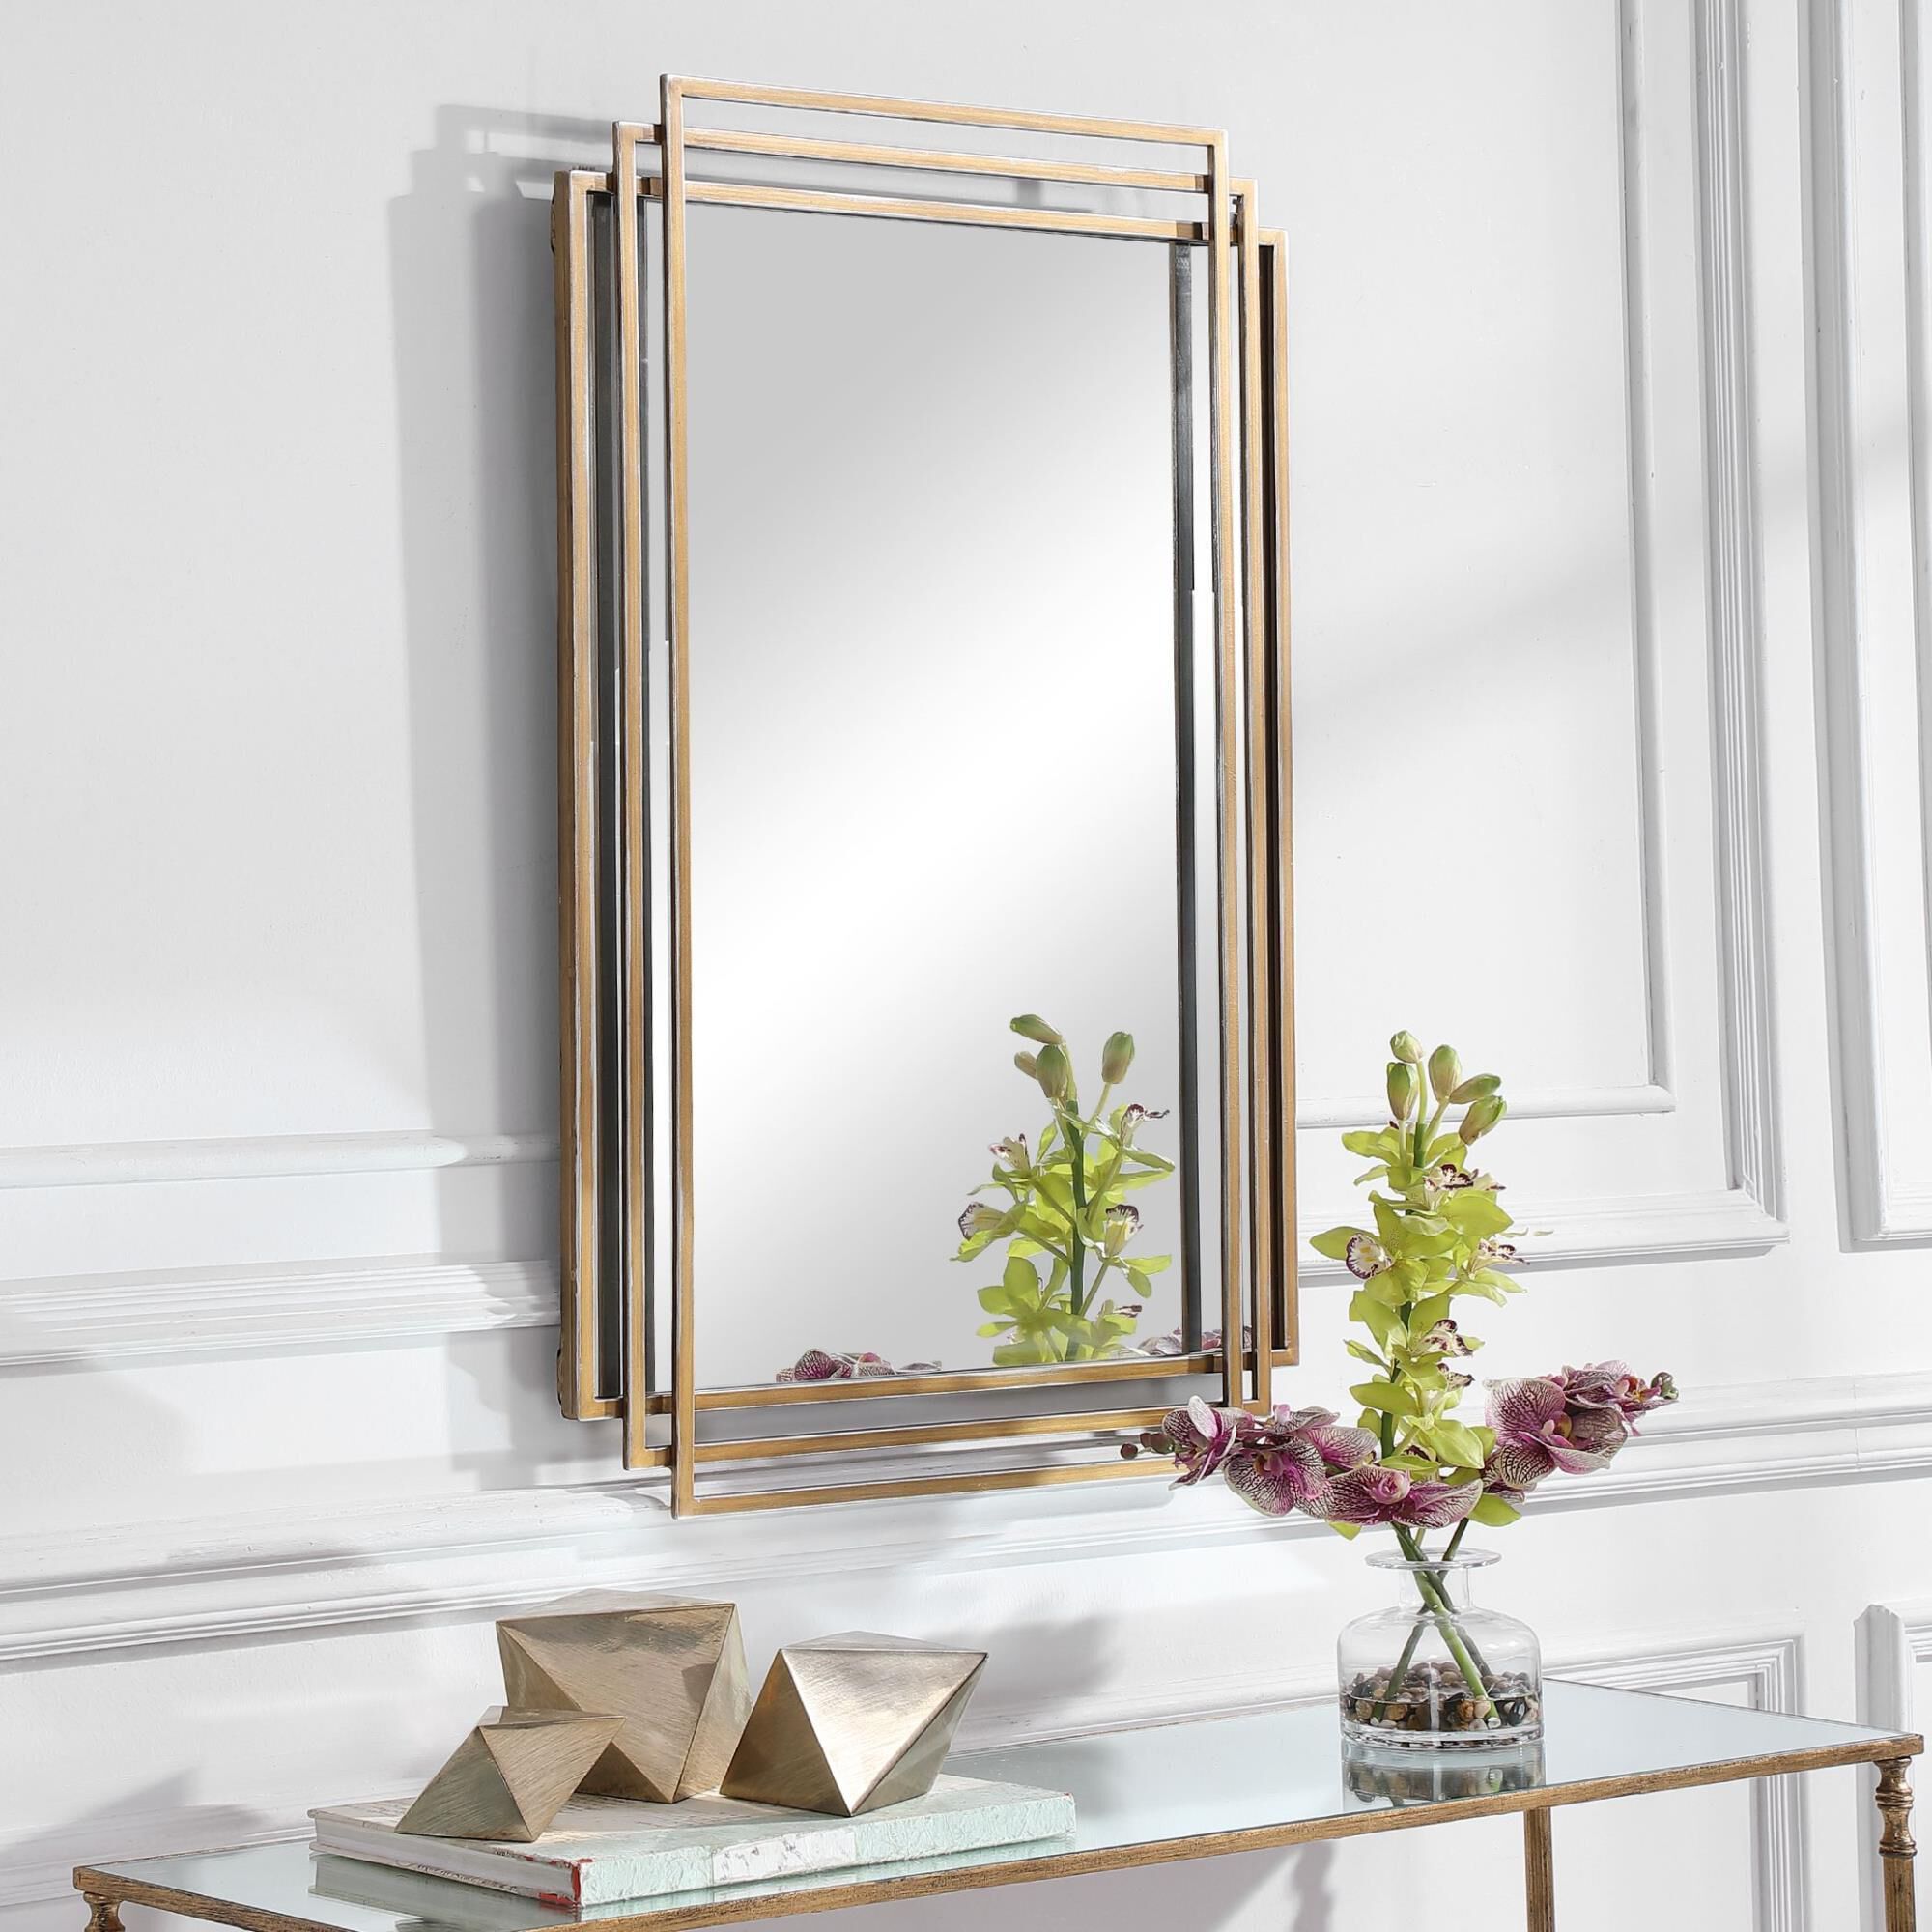 Uttermost Amherst Brushed Gold Mirror Decorative Mirrors | Capitol Regarding Brushed Gold Wall Mirrors (View 3 of 15)